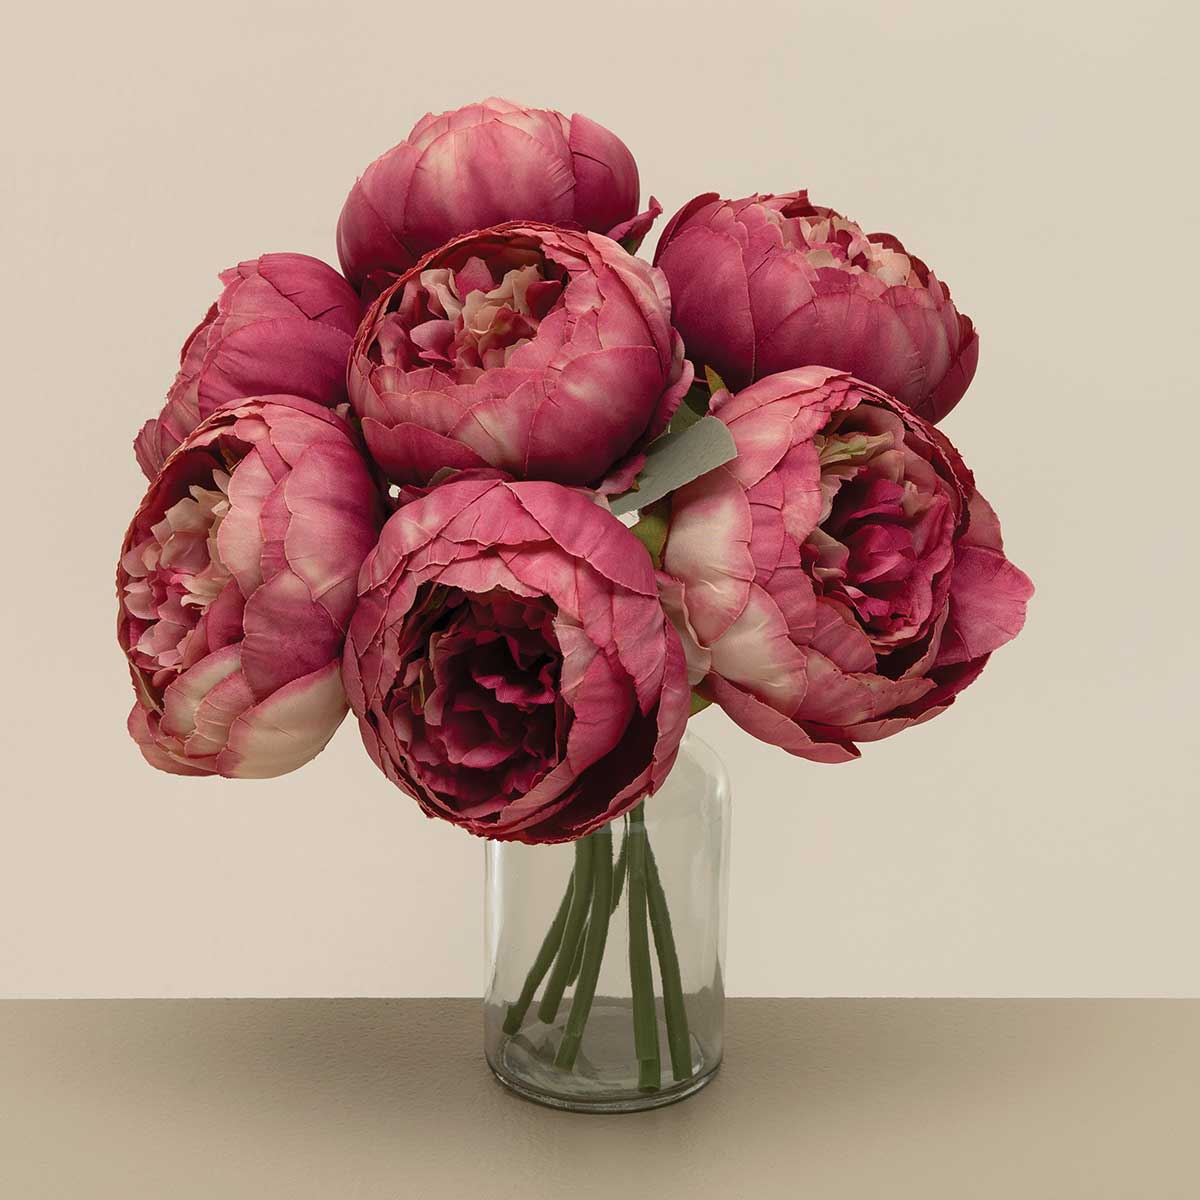 BUNDLE OF 7 PEONY ROSE 3IN X 10IN POLYESTER TIED WITH RAFFIA